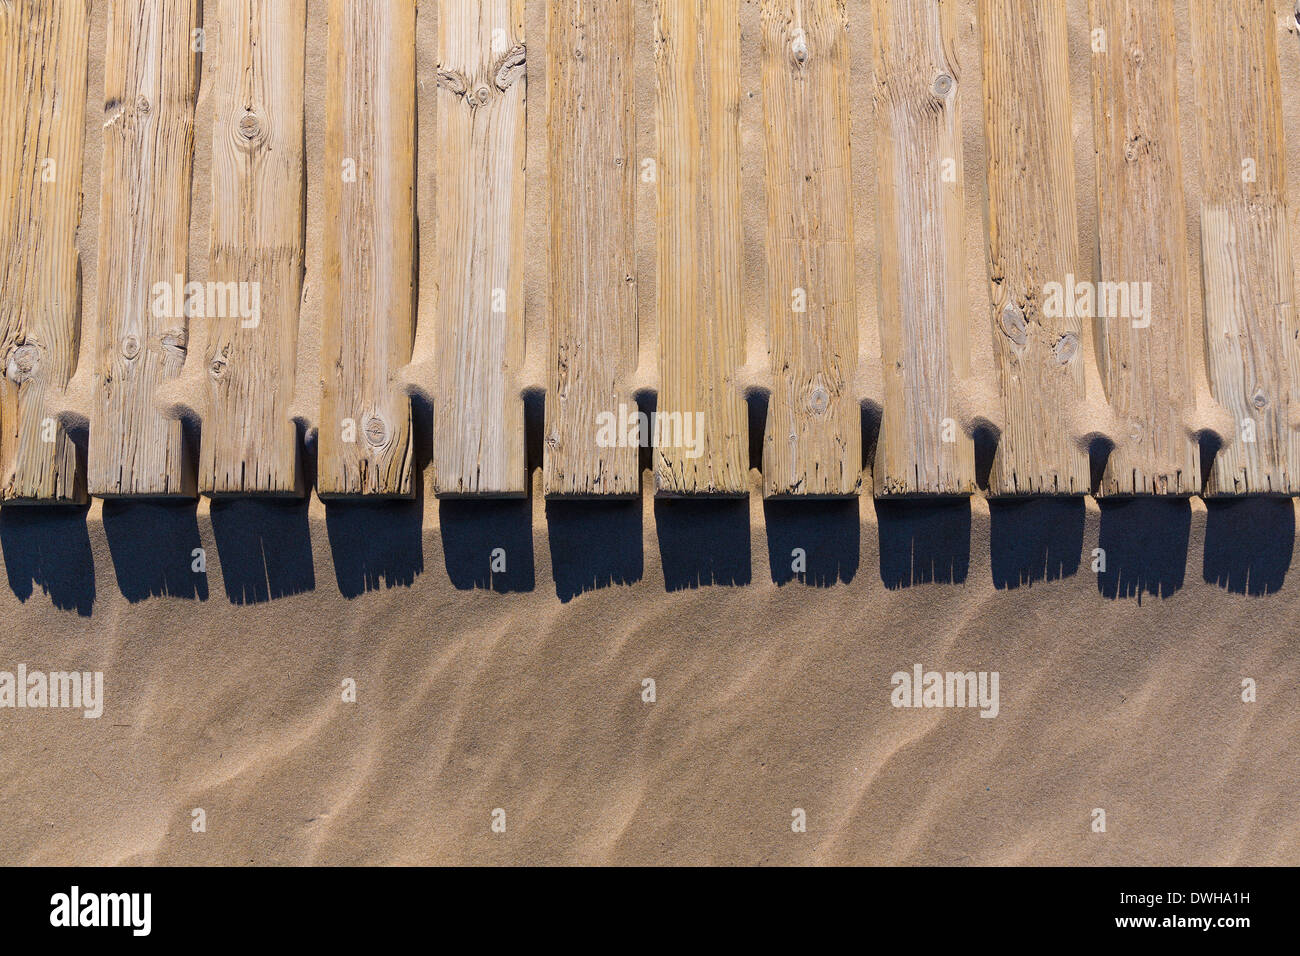 pine wood deck weathered in beach sand pattern texture detail Stock Photo